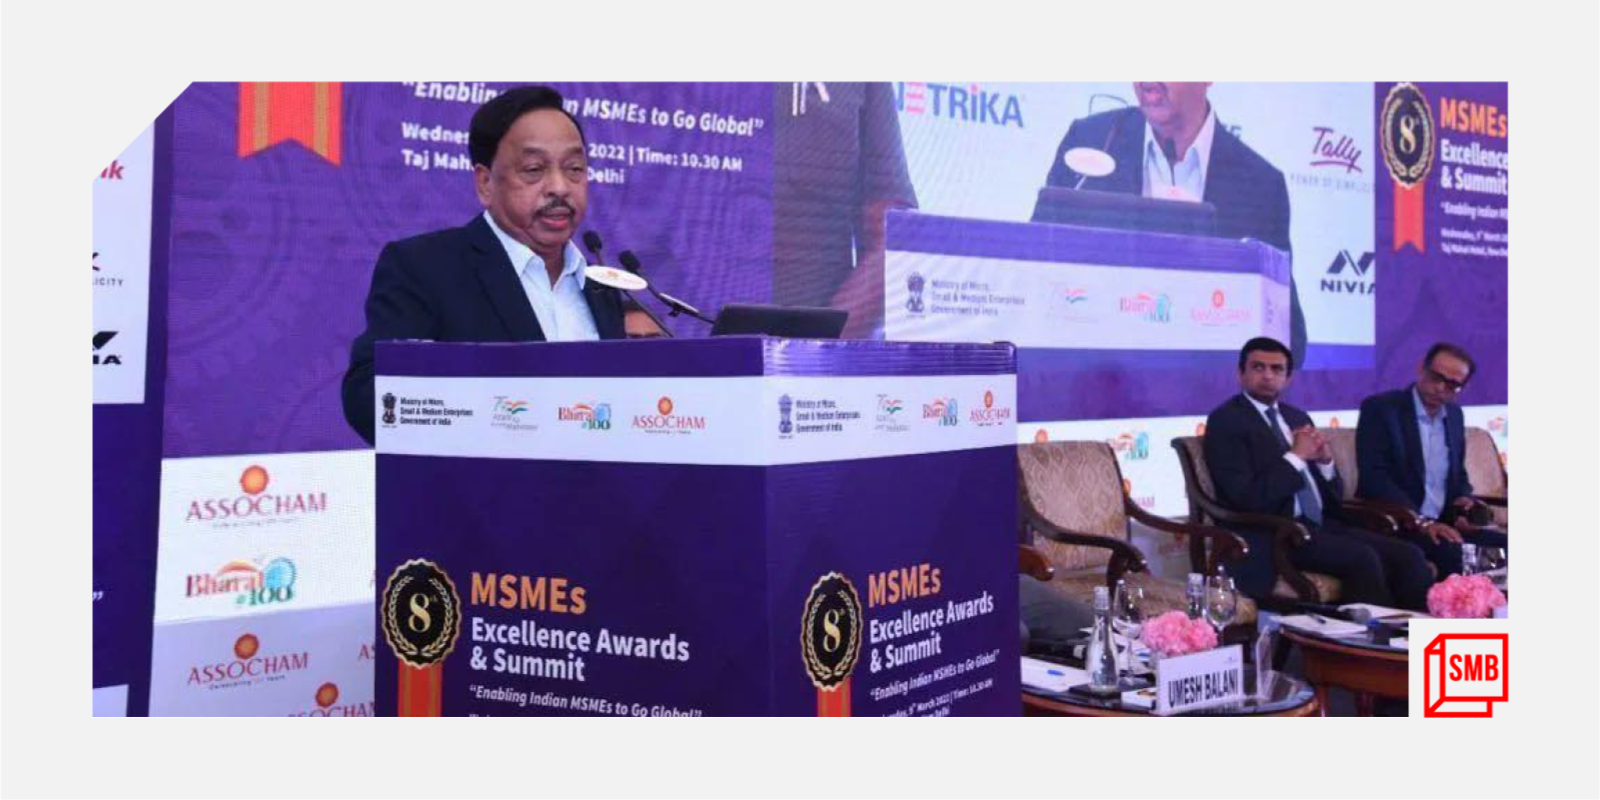 MSMEs play significant role in making Aatmanirbhar Bharat: Union Minister Narayan Rane at ASSOCHAM event